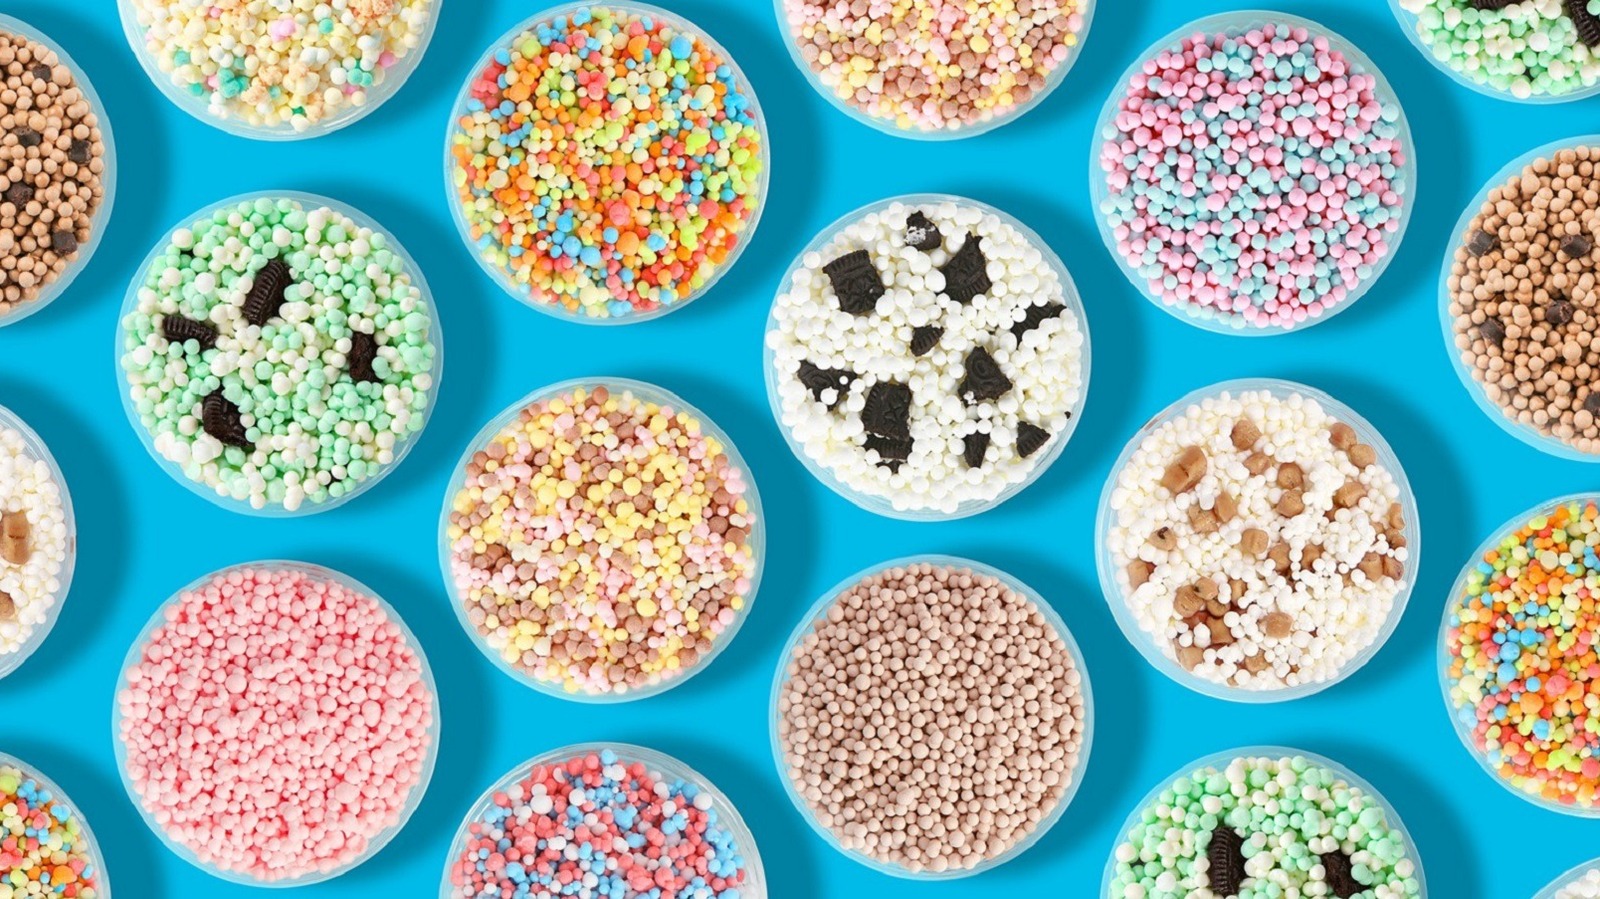 https://www.tastingtable.com/img/gallery/18-dippin-dots-flavors-ranked-worst-to-best/l-intro-1666377087.jpg